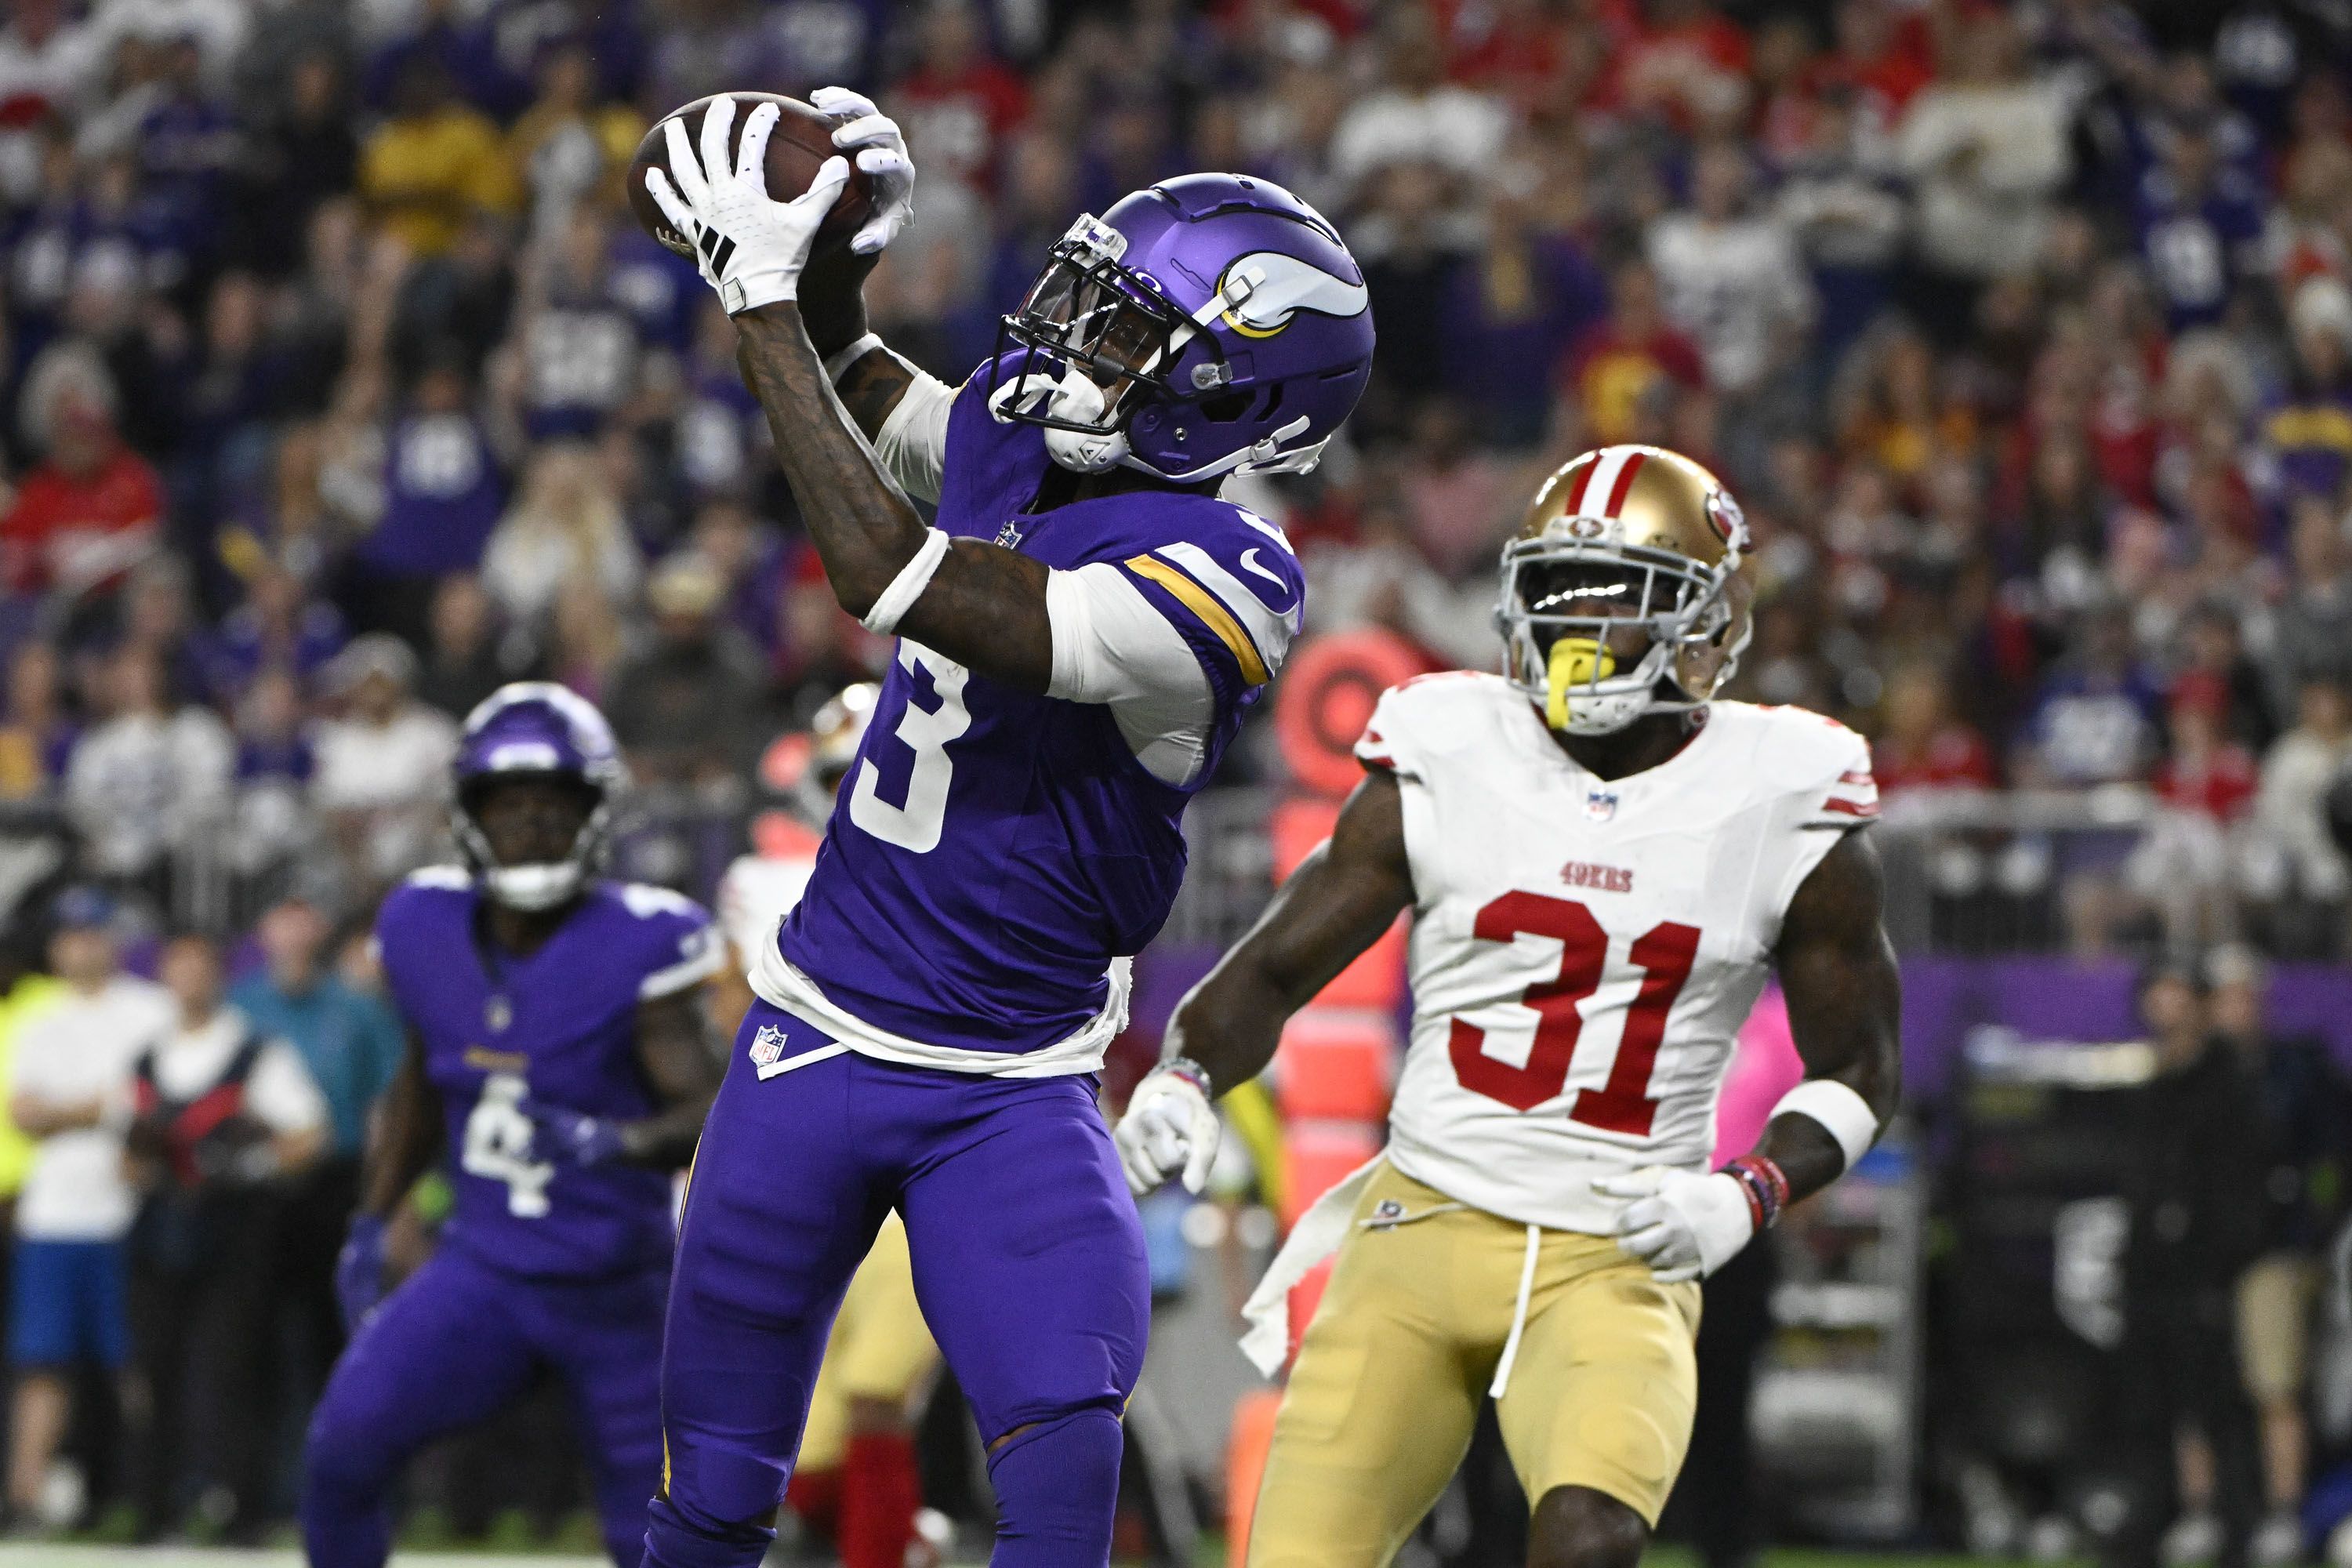 Vikings vs. 49ers: Rookie Jordan Addison has game to remember as Minnesota  hands San Francisco its second straight loss